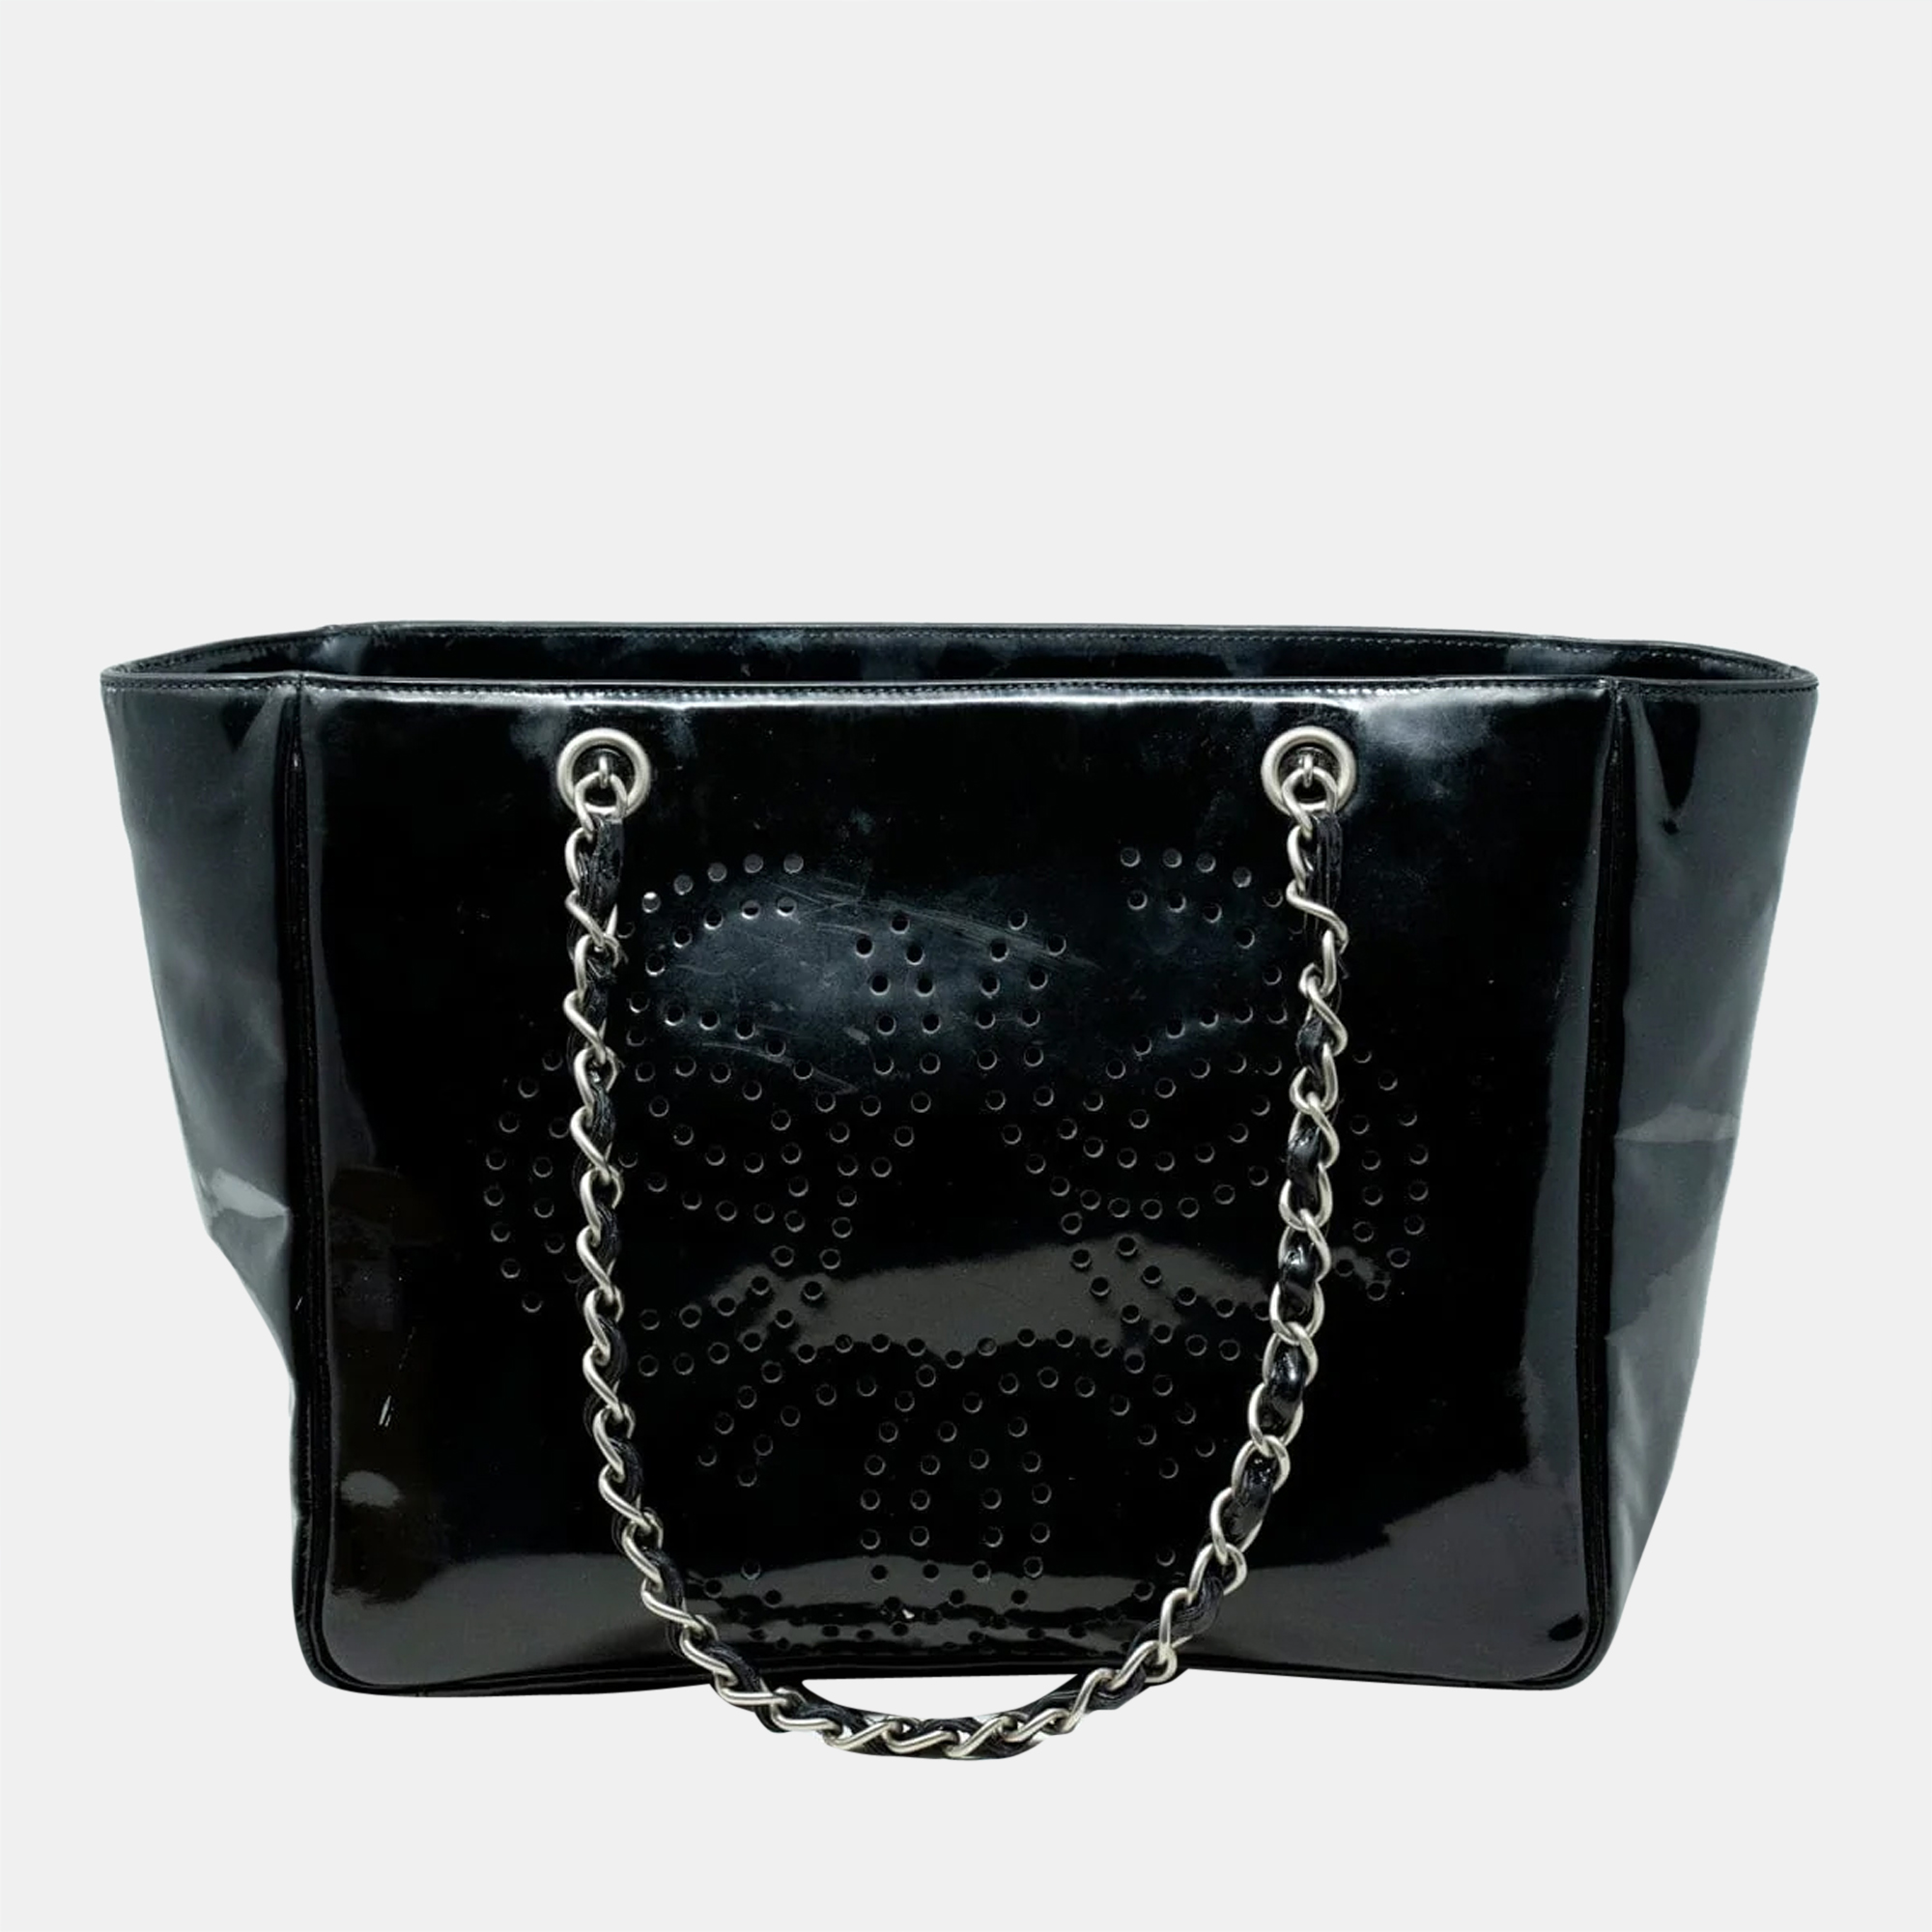 Chanel vintage perforated logo chain tote - awl2646